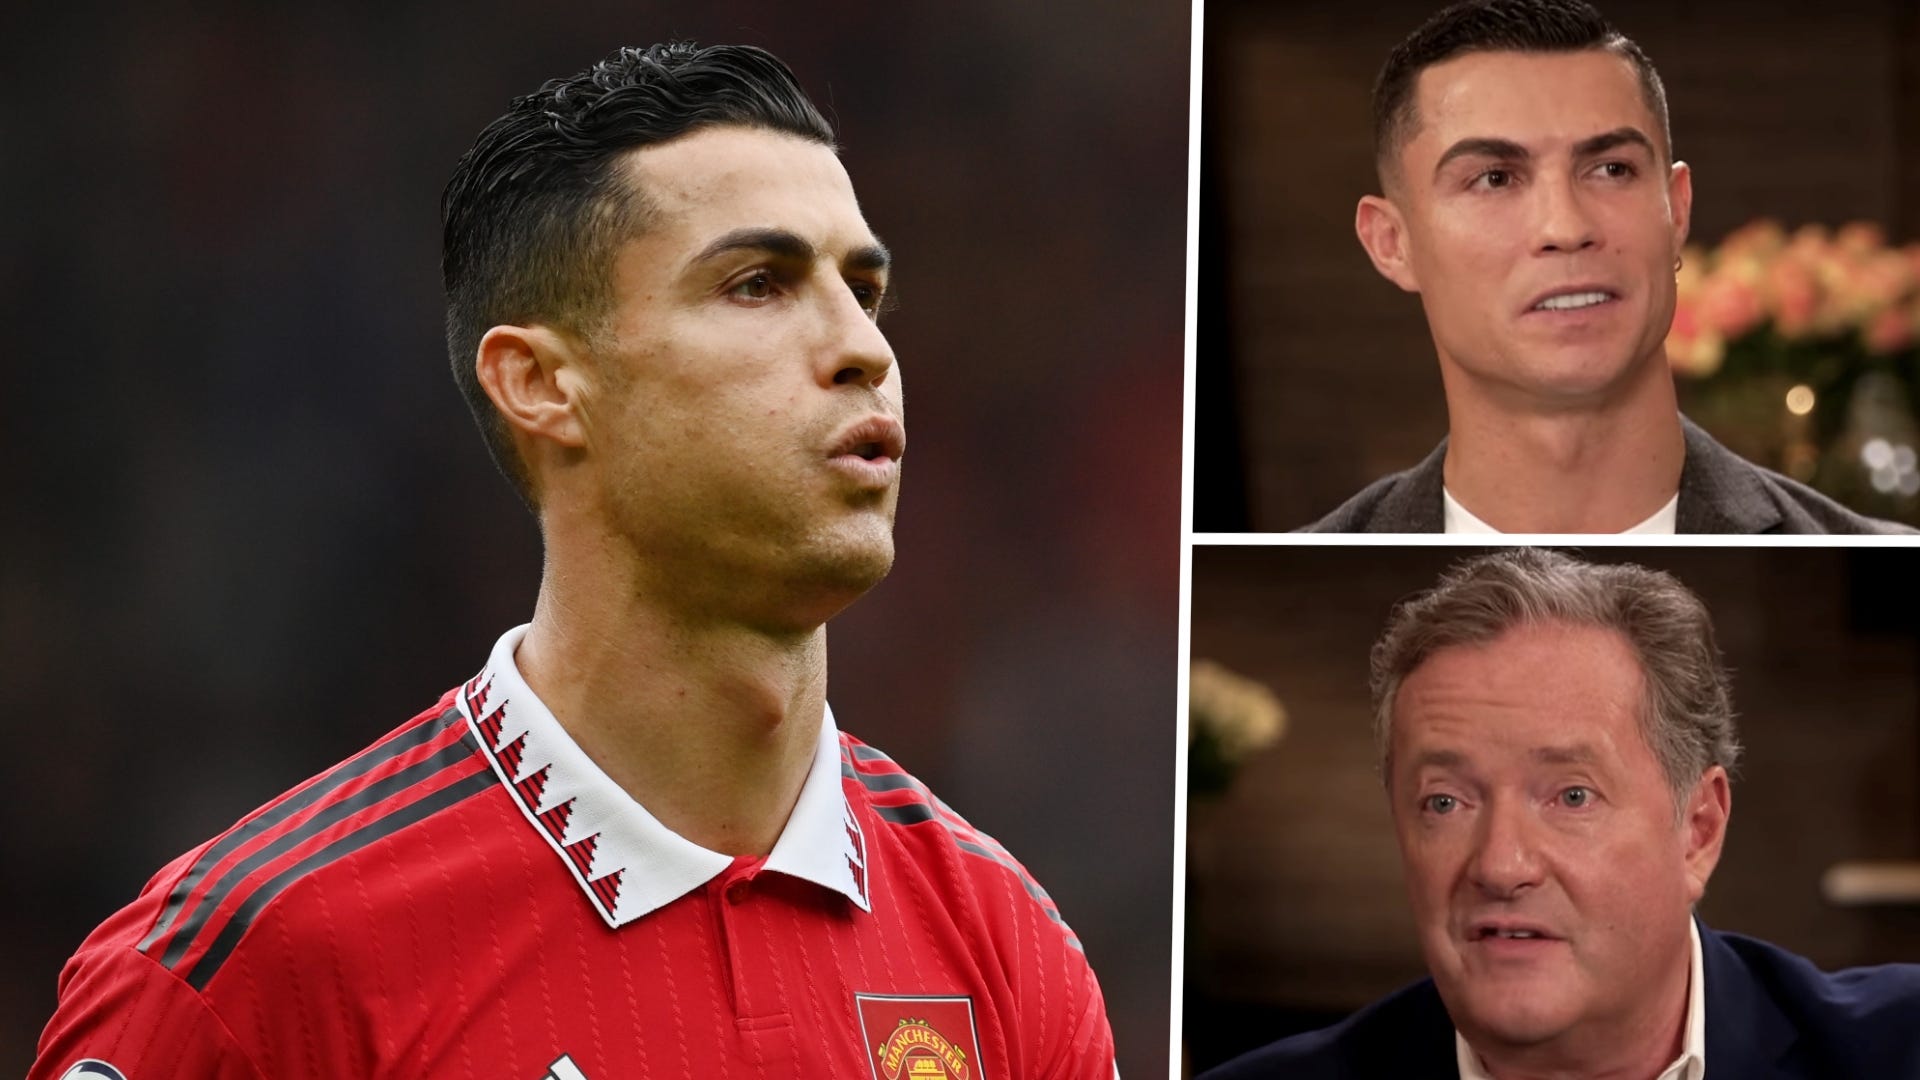 Cristiano Ronaldo interview: TV channel, time & how to watch Man Utd star's Piers Morgan chat thumbnail